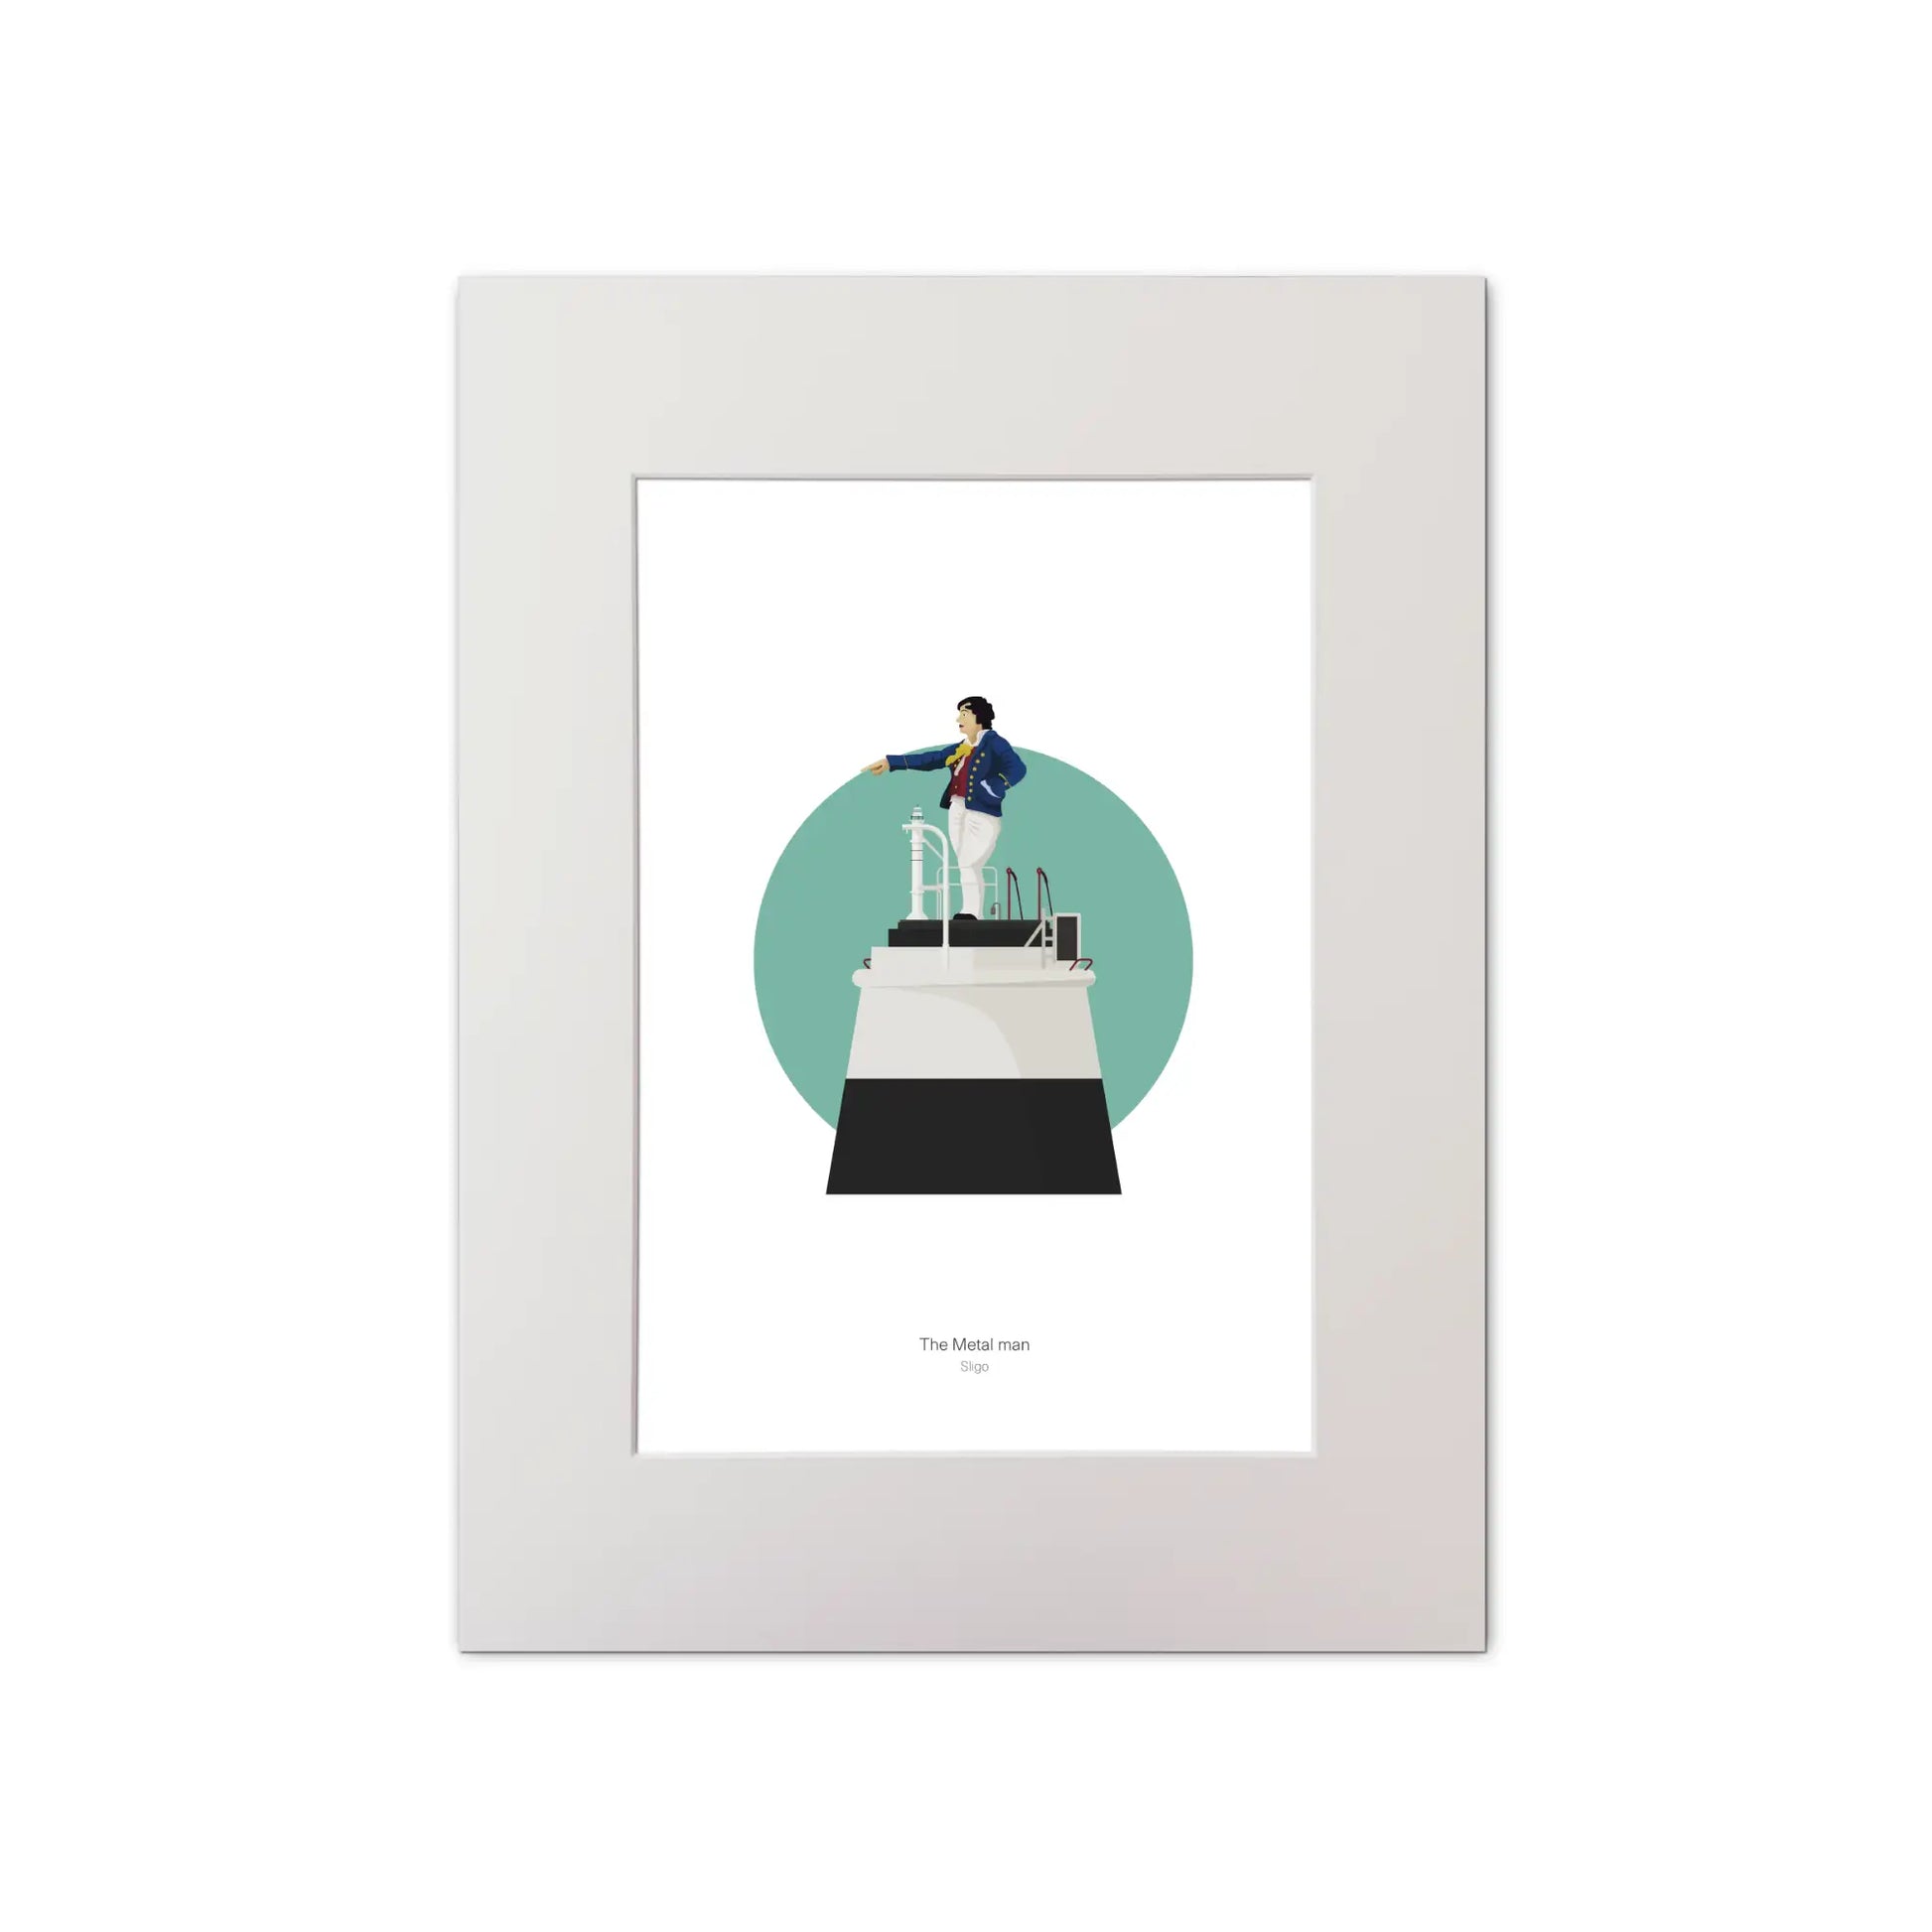 Contemporary graphic illustration of the Metal Man lighthouse on a white background inside light blue square, mounted and measuring 30x40cm.